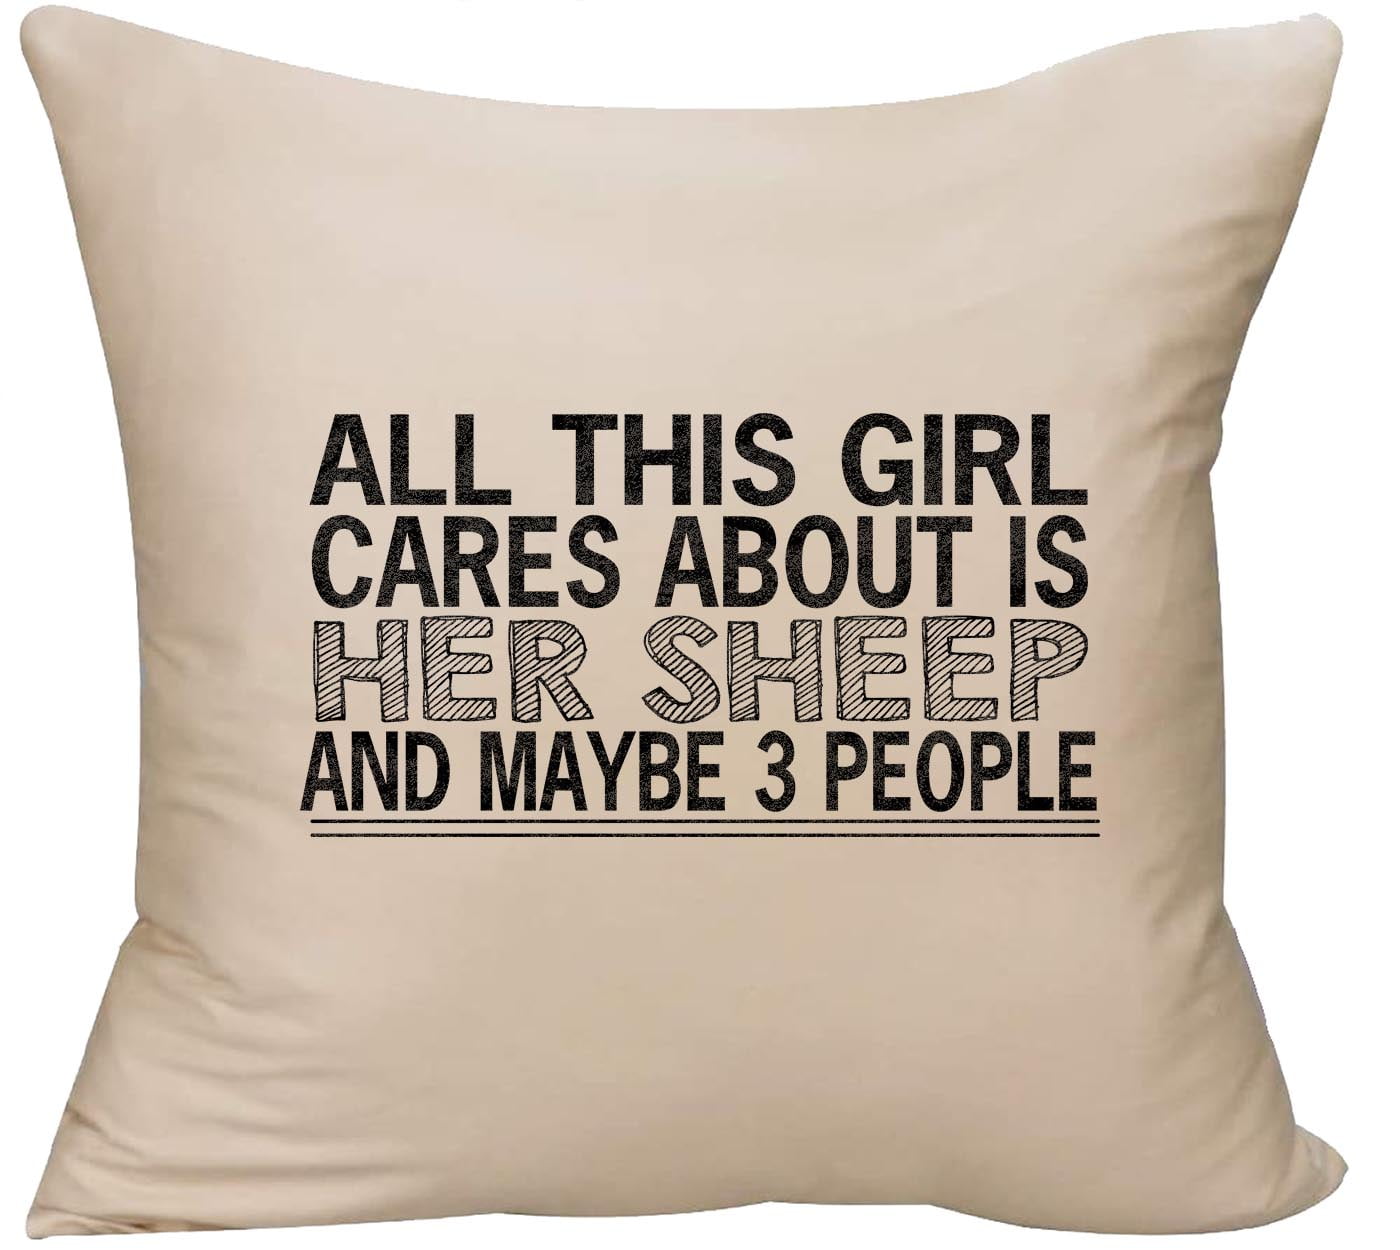 This Girl Cares About Is Her Sheep Sheep Lover Funny Gift Throw Pillow Multicolor 18x18